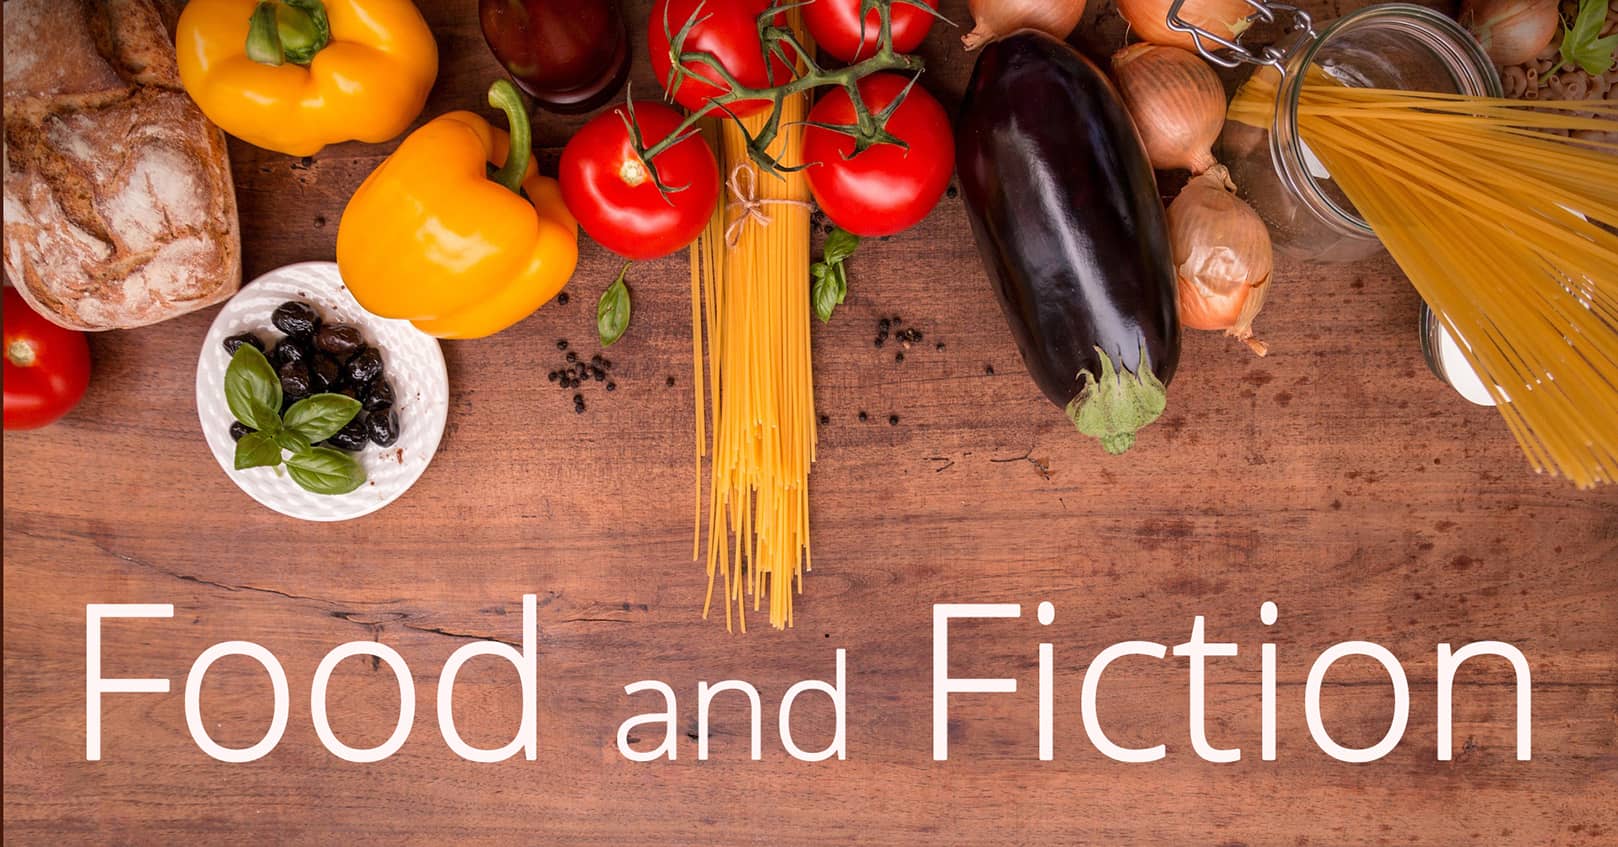 Food and Fiction